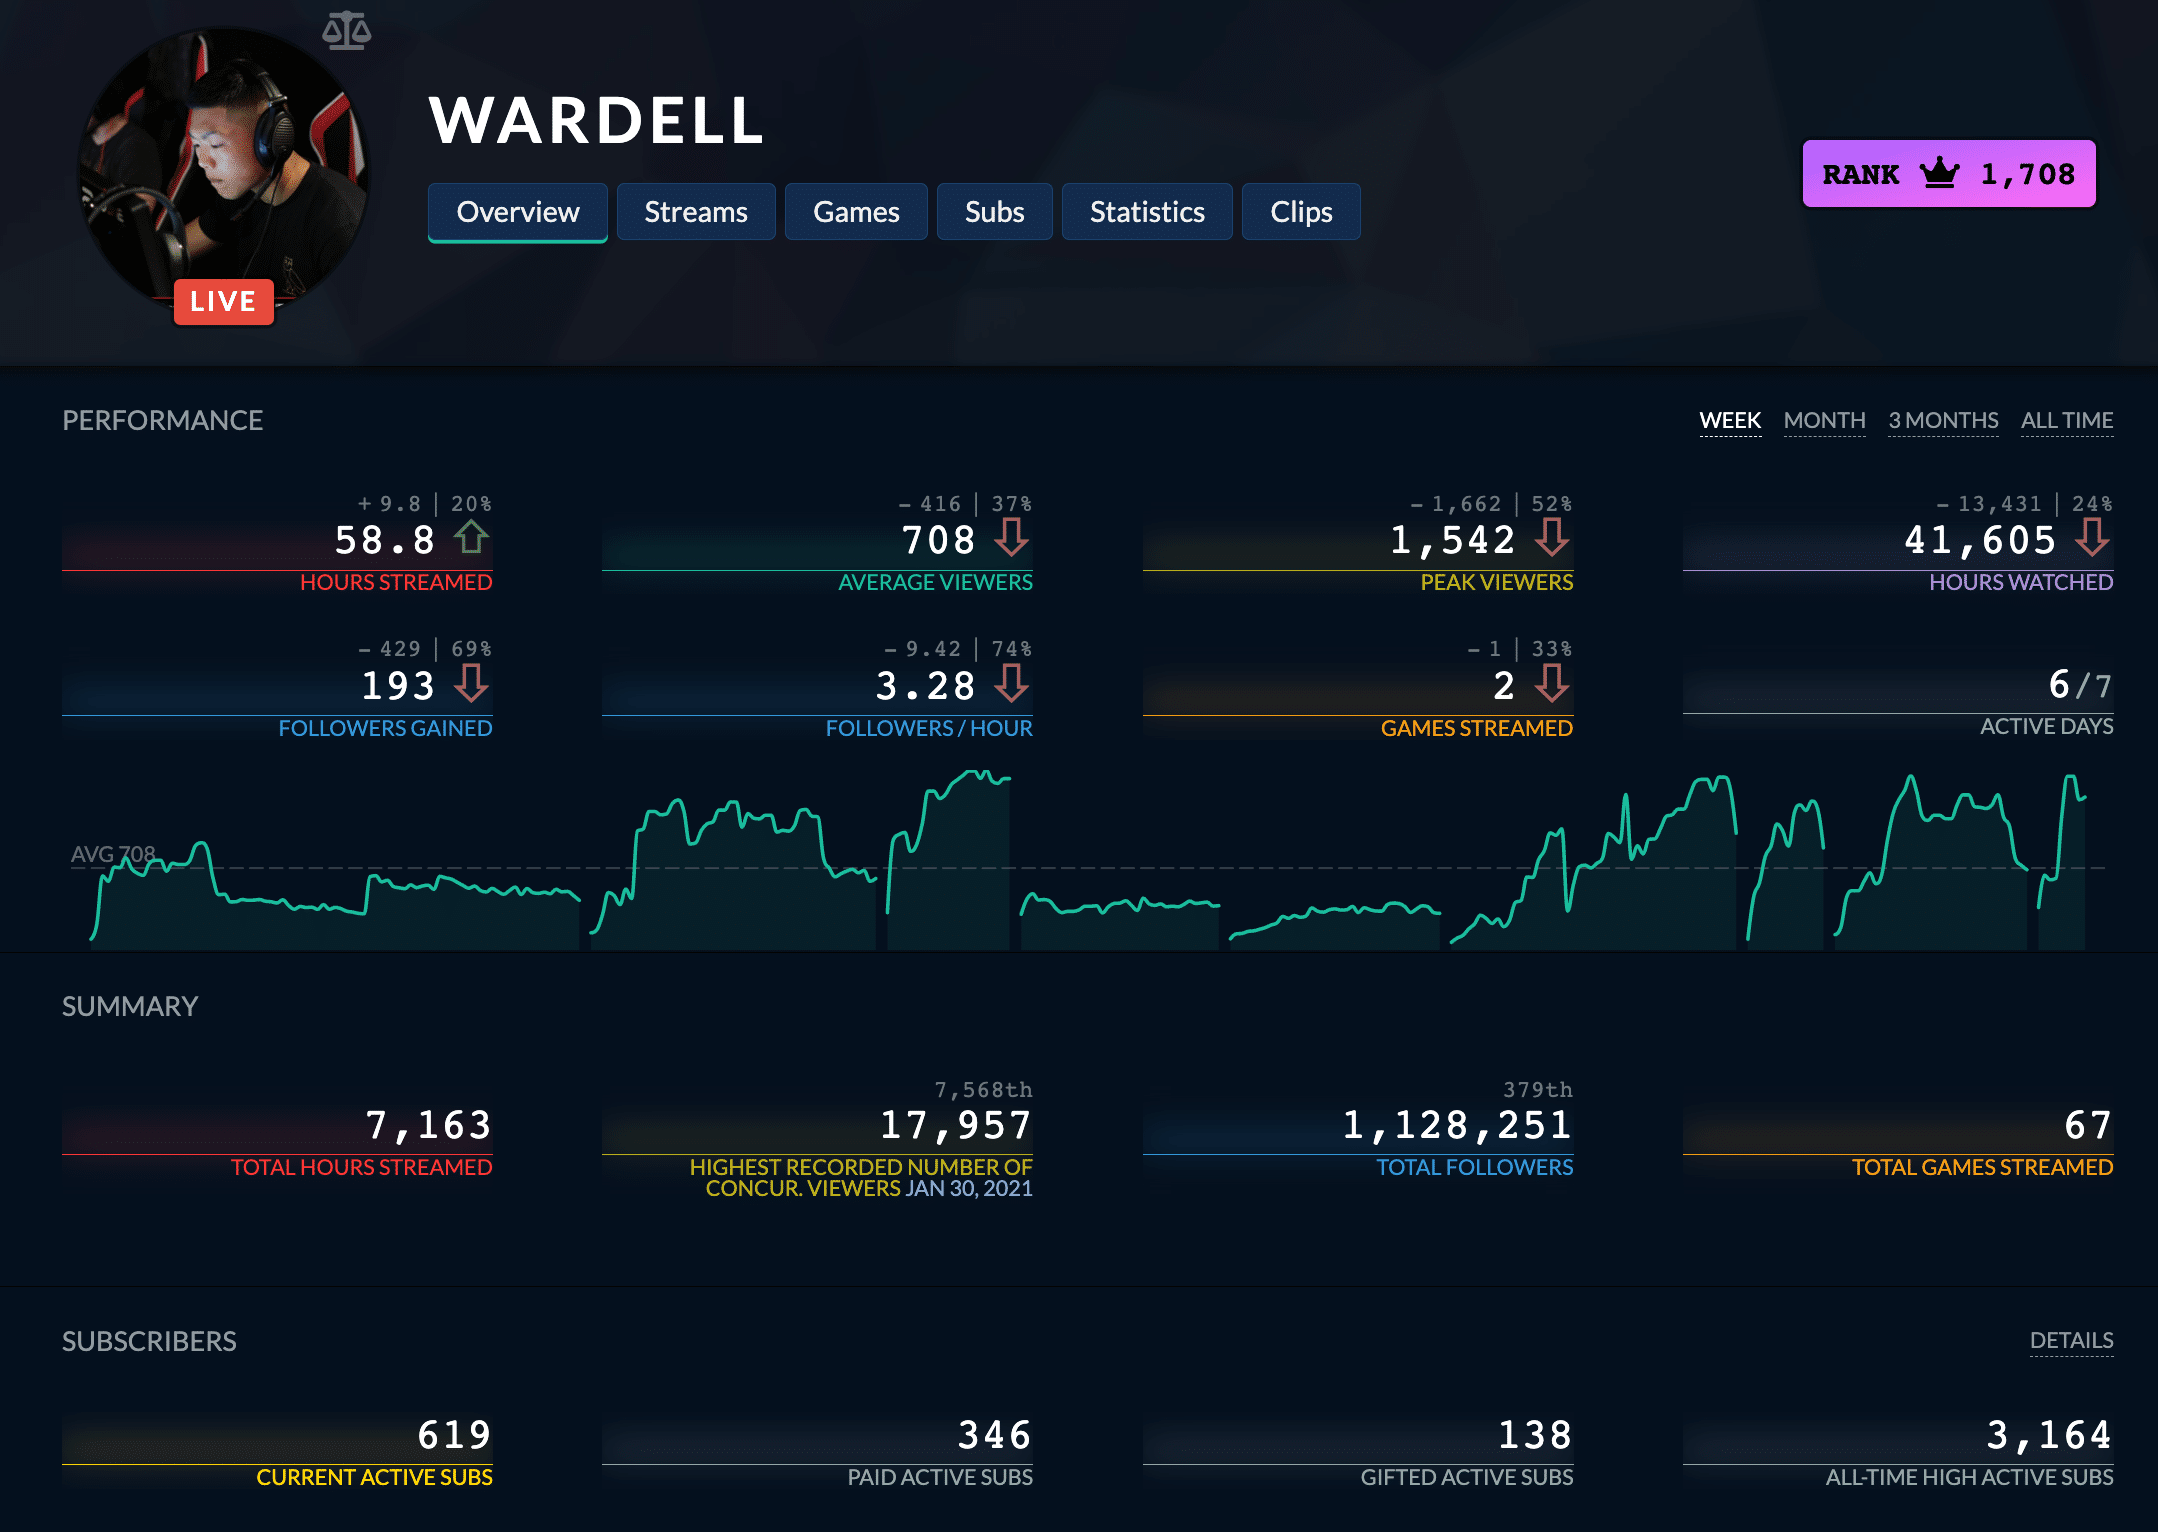 Wardell's Twitch stats on TwitchTracker